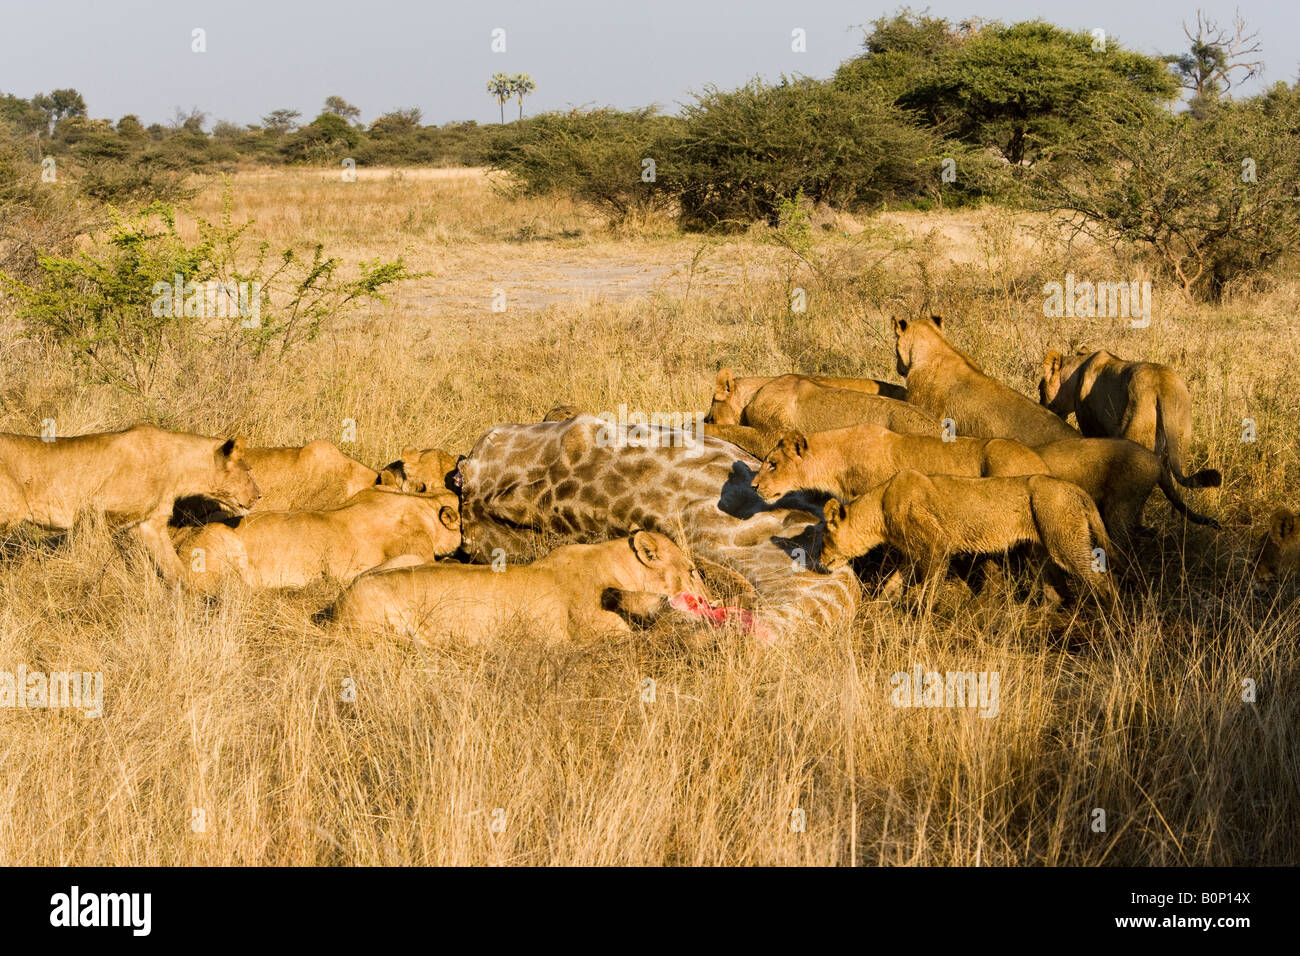 Large pride of Lions feed on a recent giraffe kill young lions wait their turn to eat in tall grass savanna Okavango Delta Botswana Africa Stock Photo